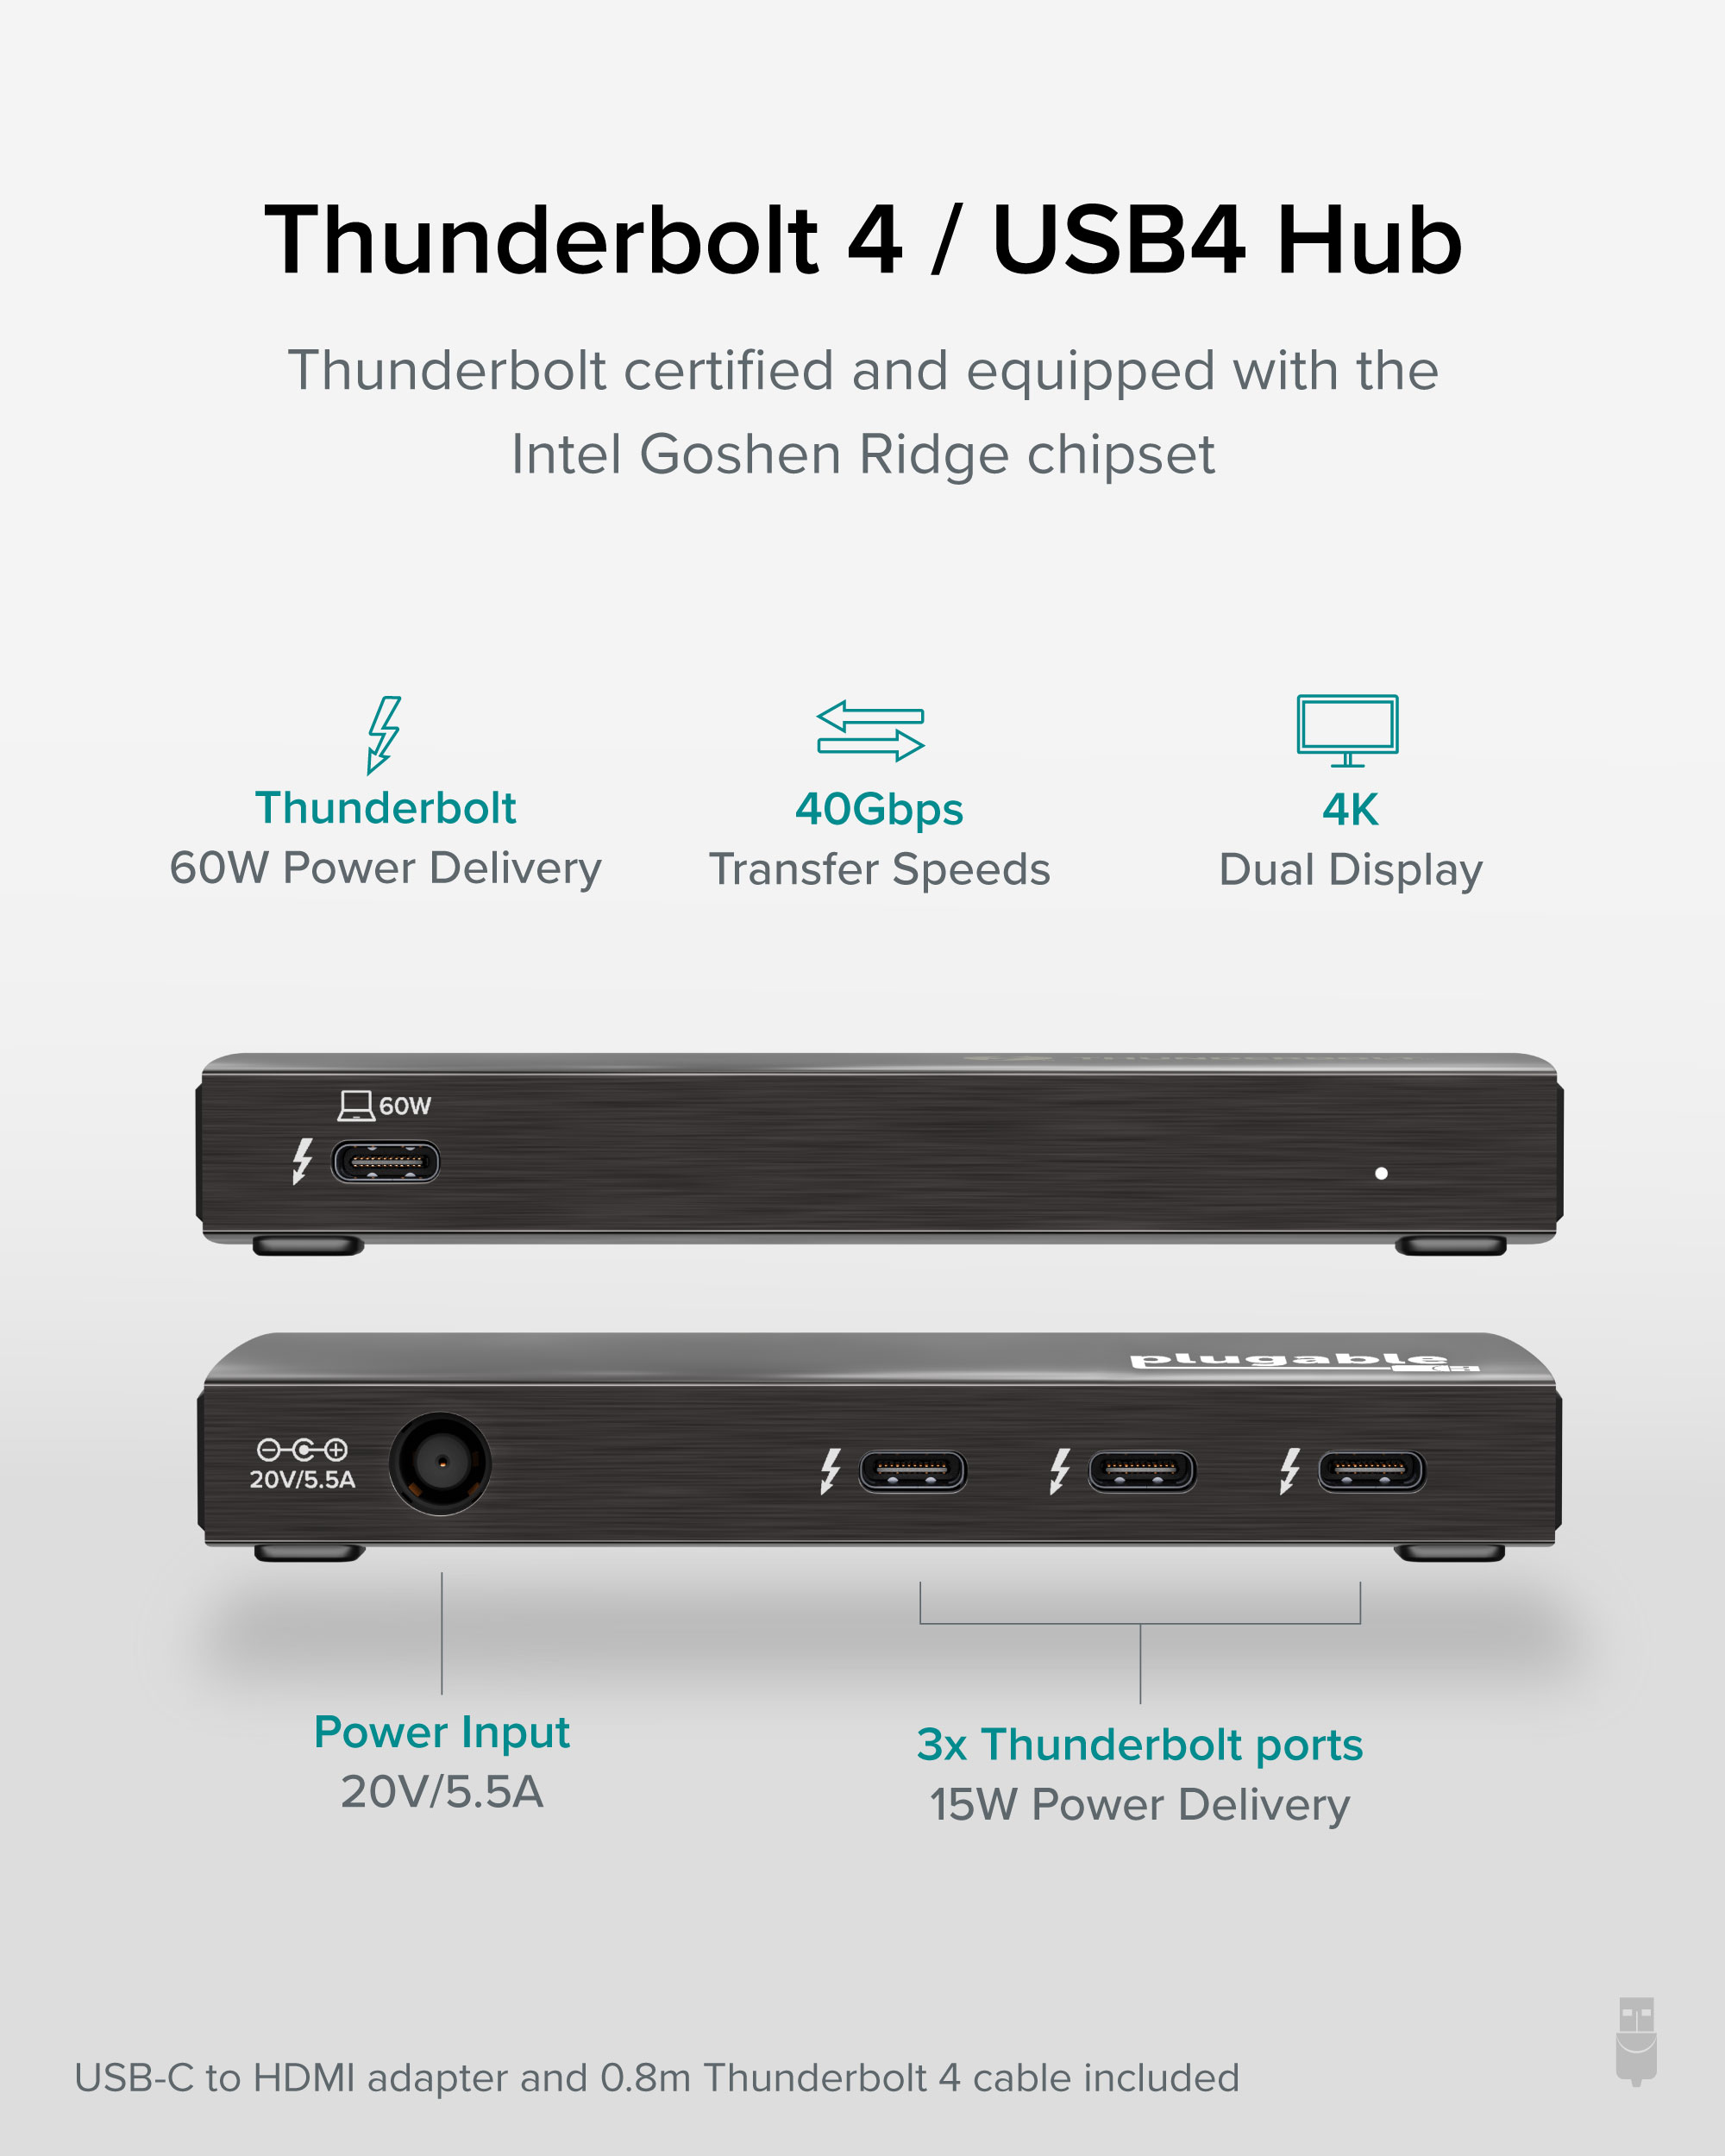 Plugable Thunderbolt 4 Hub, 4-in-1 Pure USB-C Design, Includes USB-C to 4K HDMI Adapter, 60W Laptop Charging, Compatible with Mac and Windows Laptops and USB-C, Thunderbolt 3 or 4, and USB4 devices - image 5 of 8